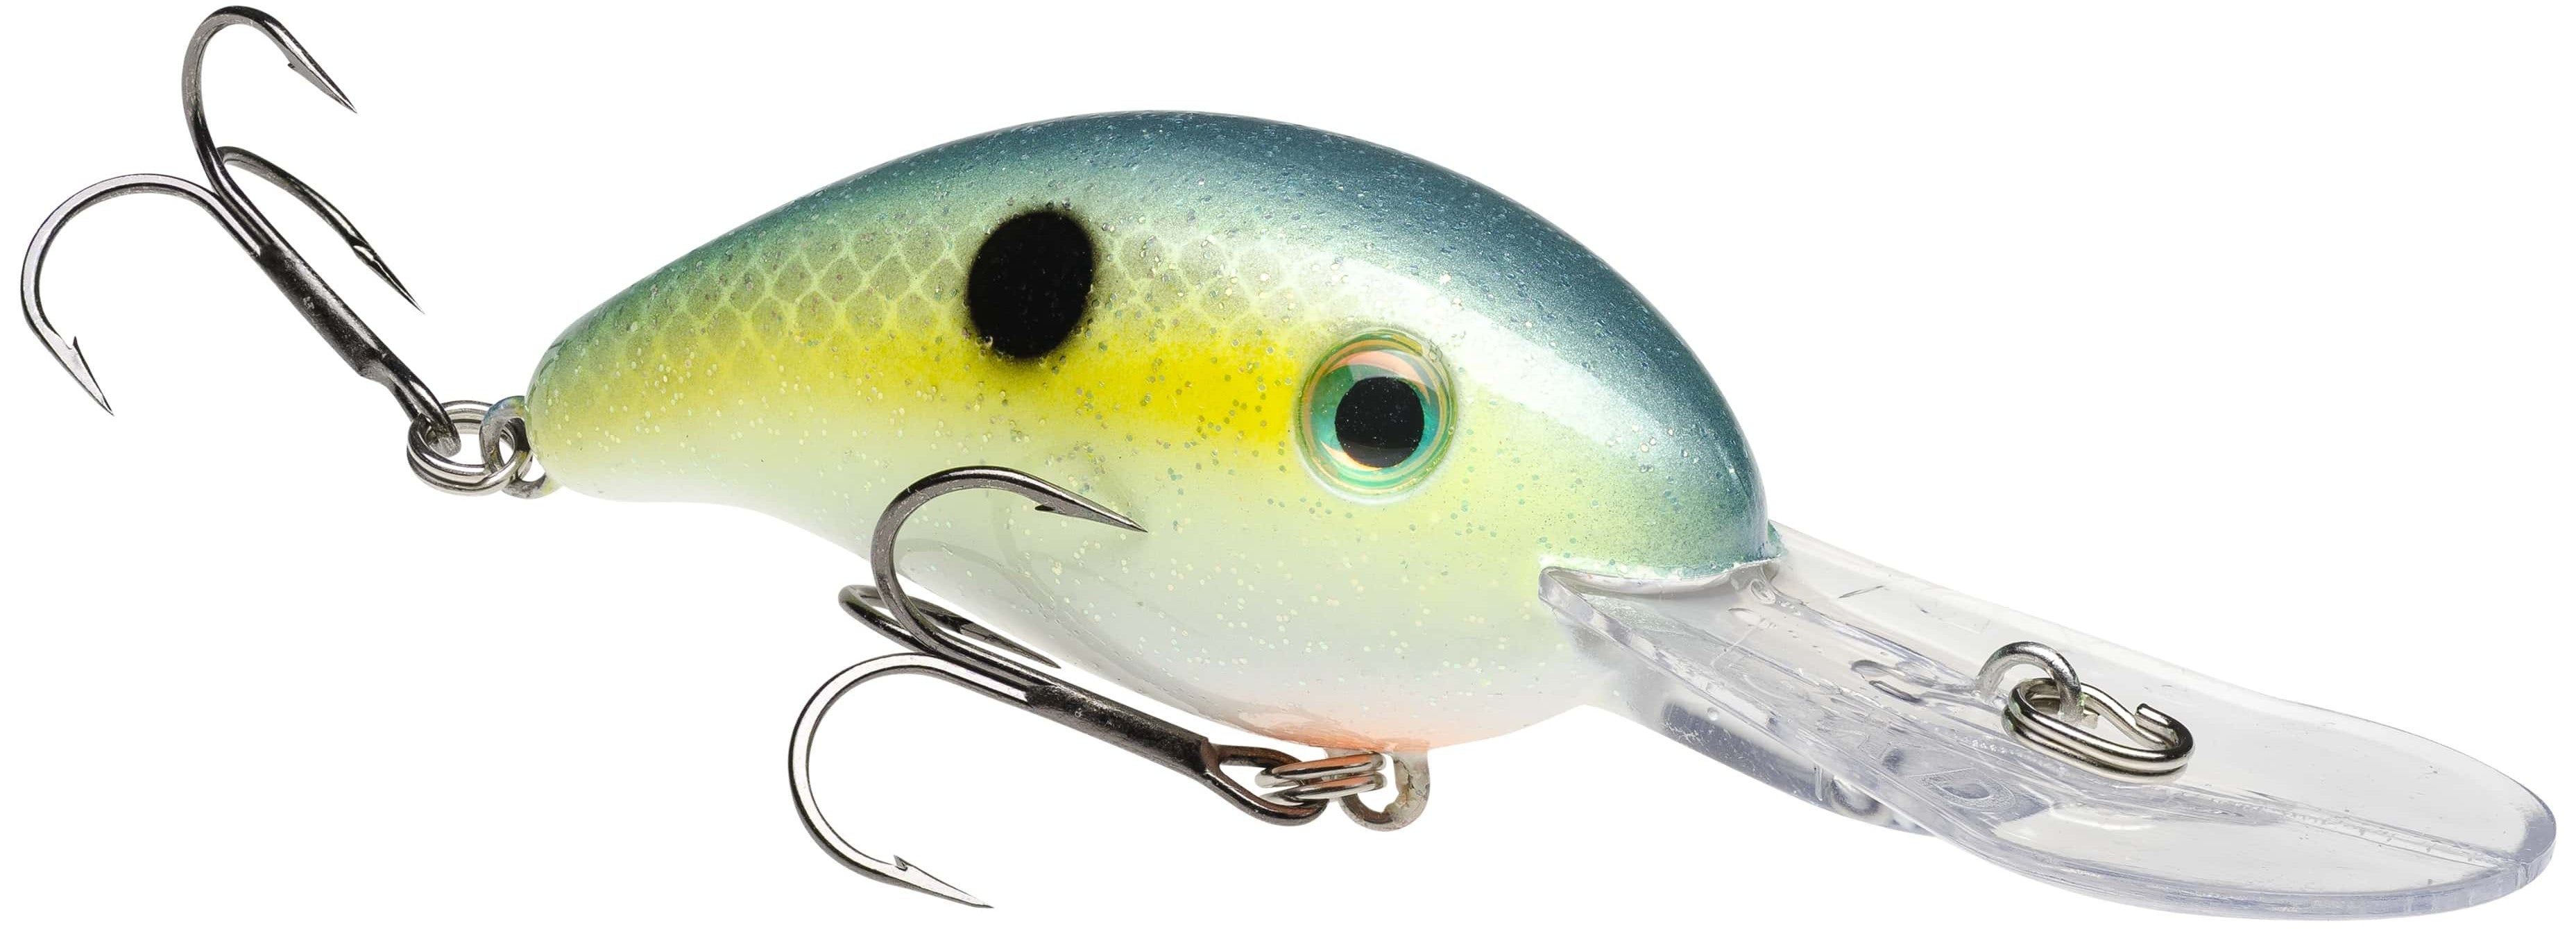 Strike King Pro-Model 3XD Chartreuse Sexy Shad